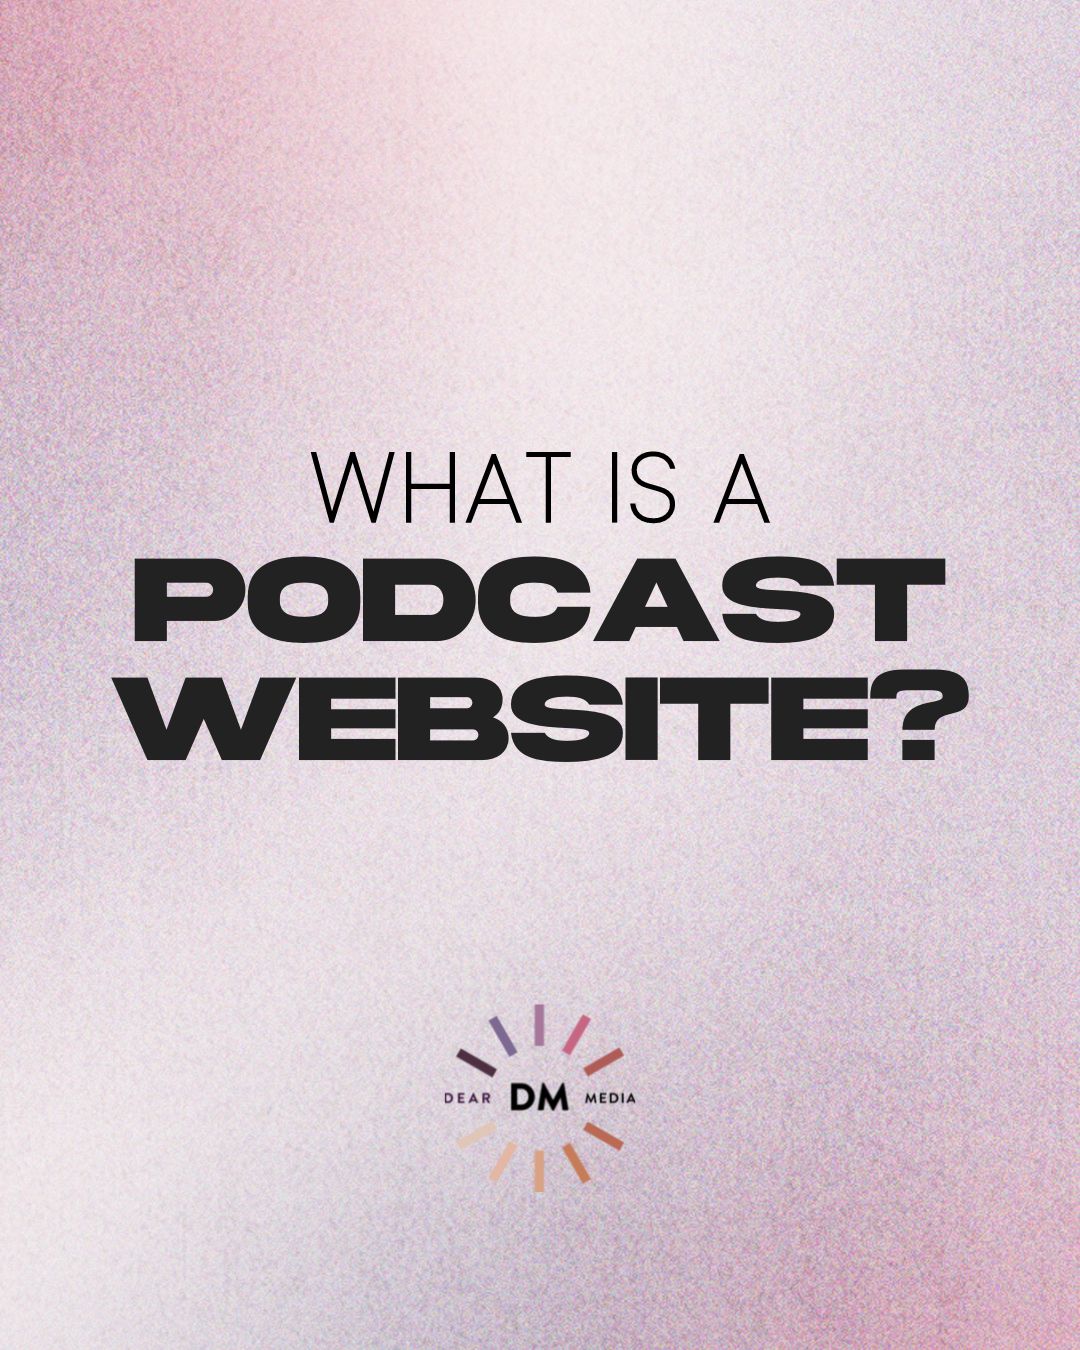 What is a podcast website written in black bold with a pink background